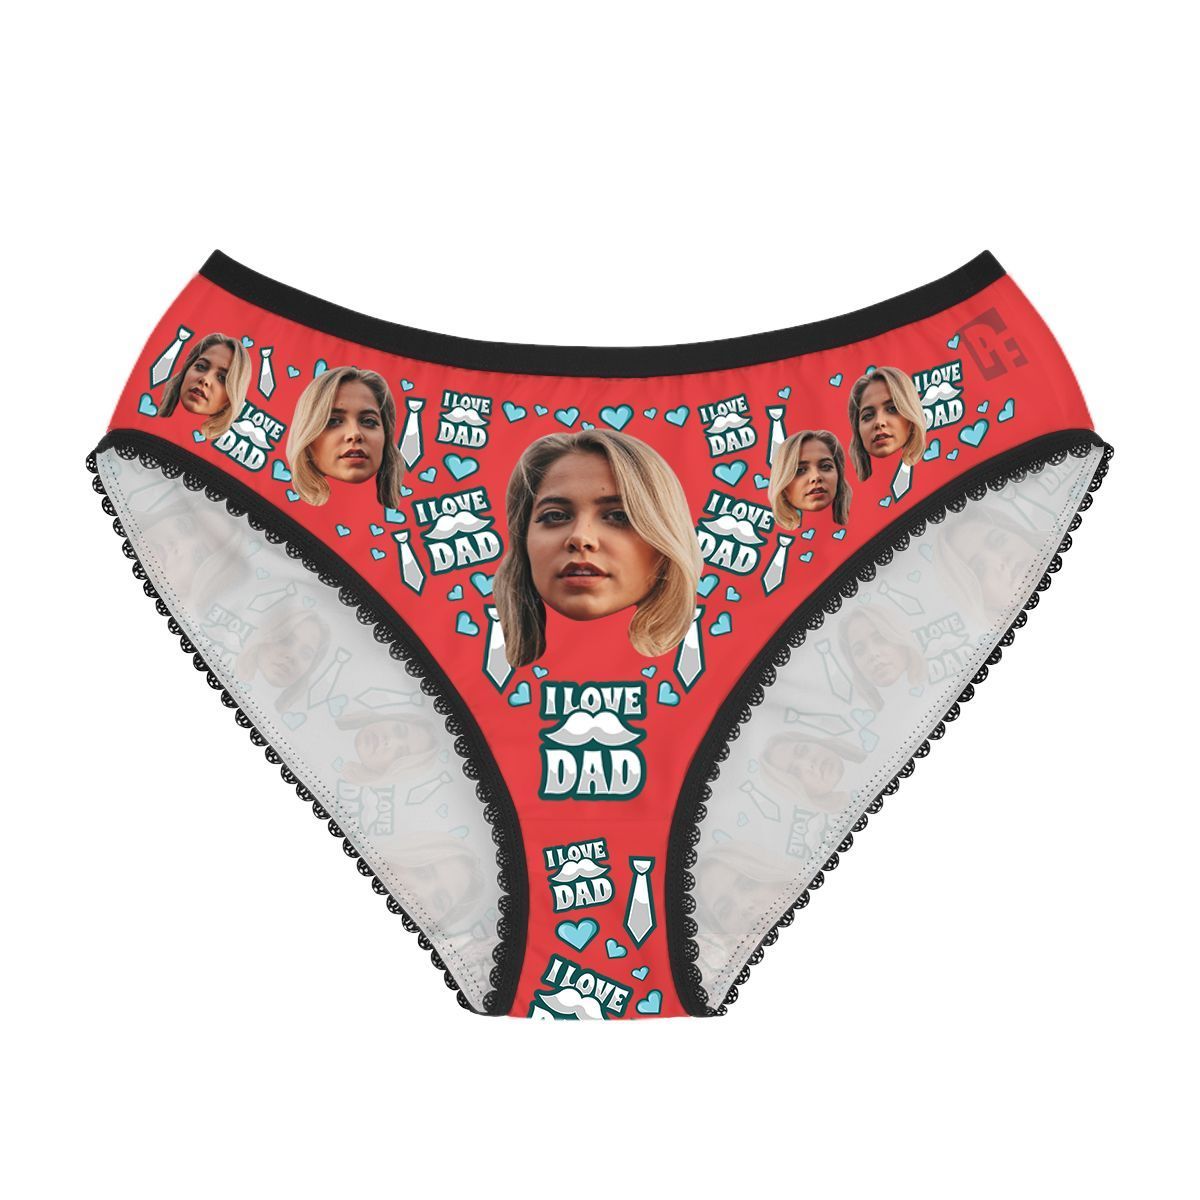 Red Love dad women's underwear briefs personalized with photo printed on them